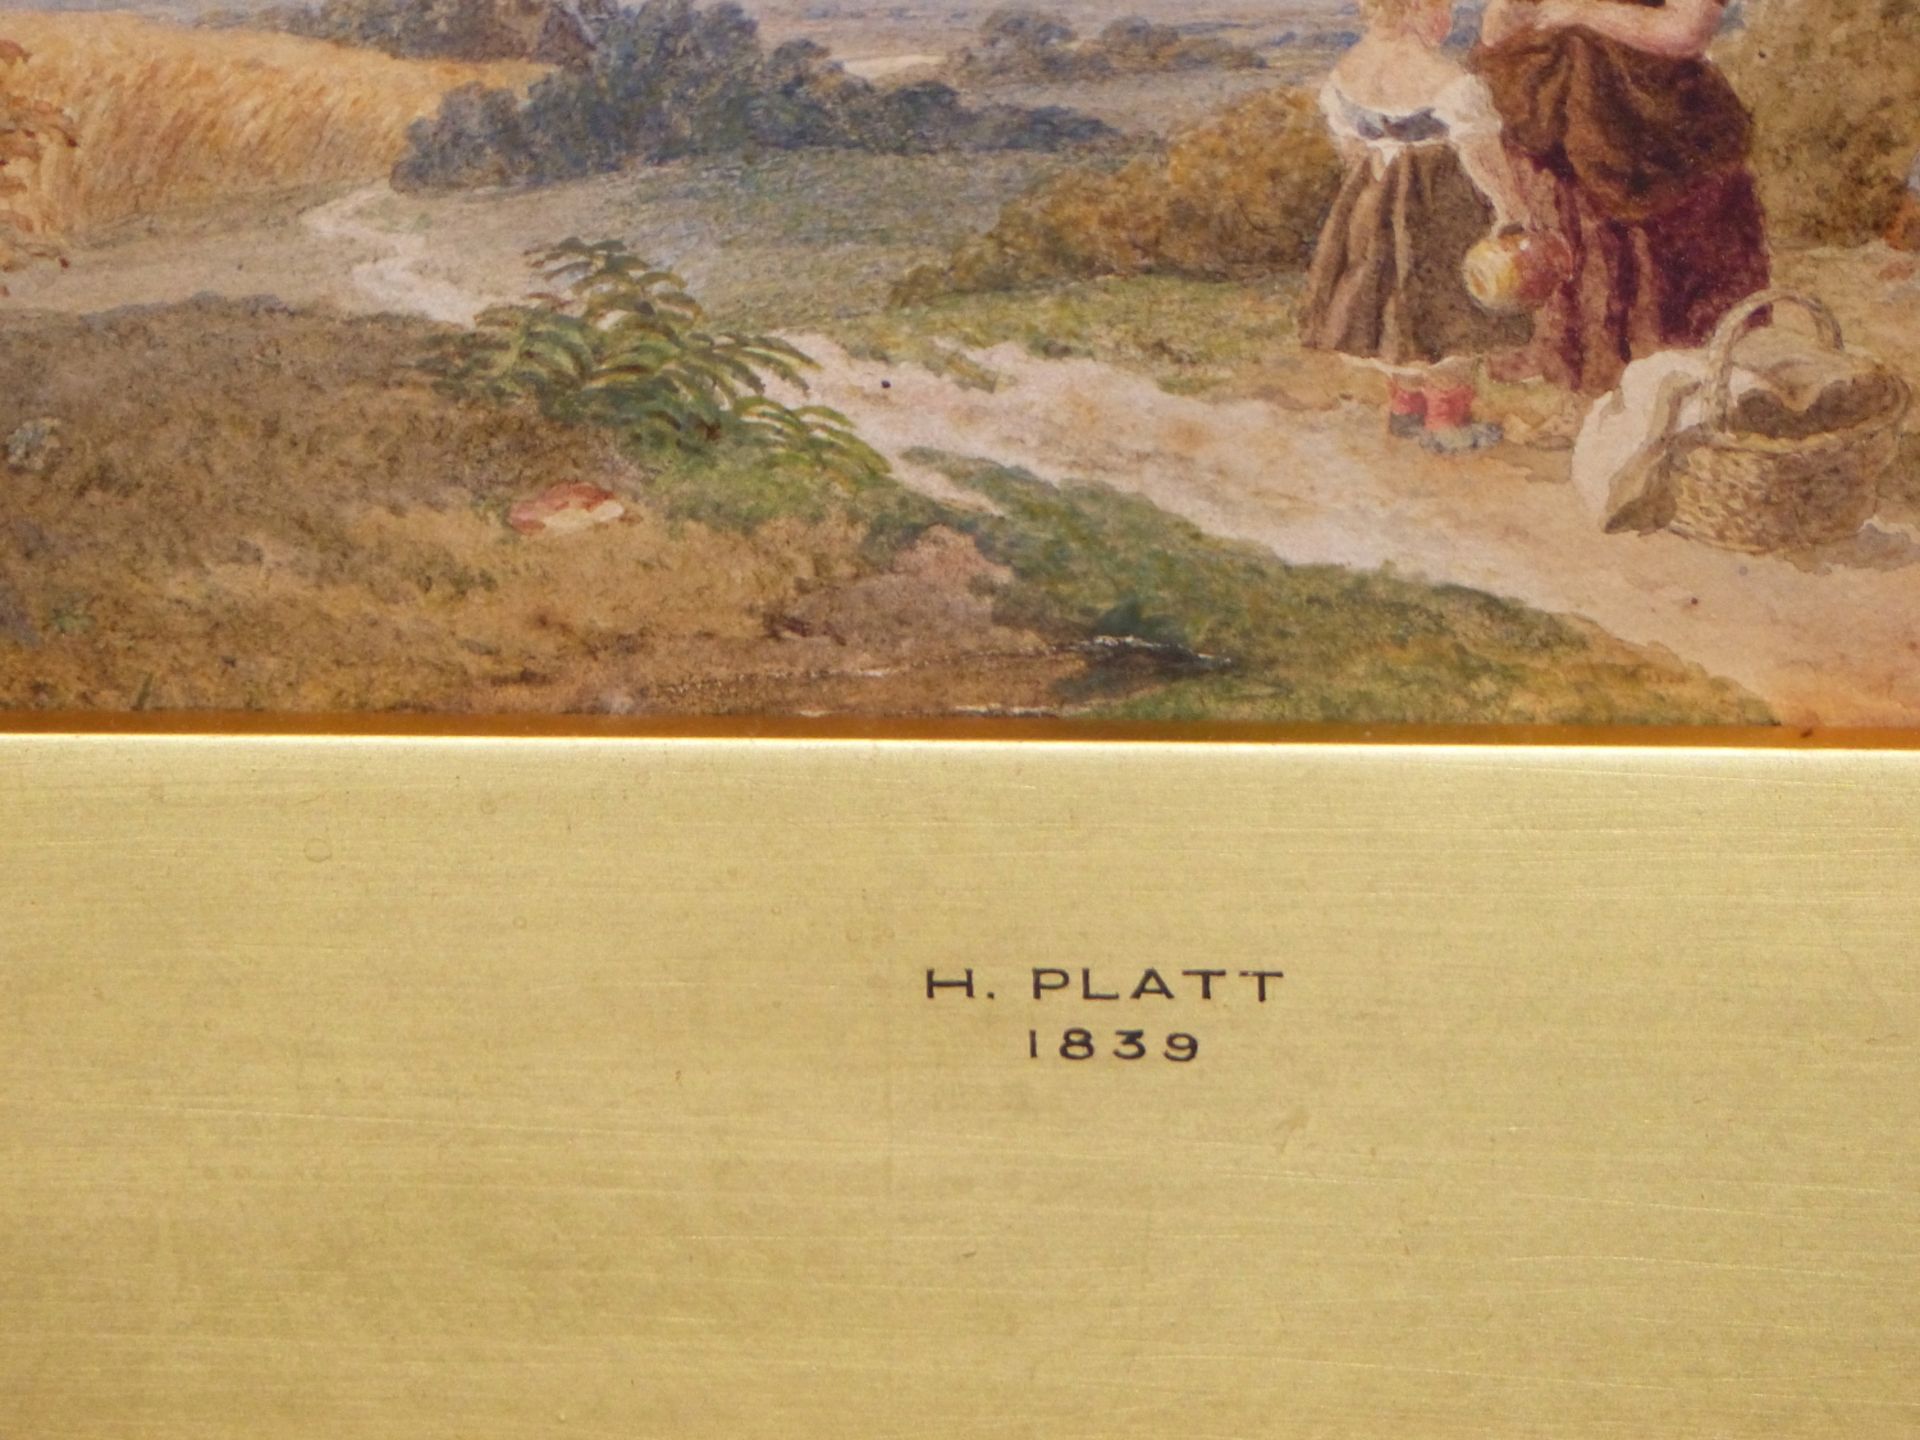 H. PLATT ( 19TH CENTURY). CHILDREN WITH FRUIT BASKET ON A COUNTRY PATH. WATERCOLOUR. SIGNED L/L - Image 3 of 7